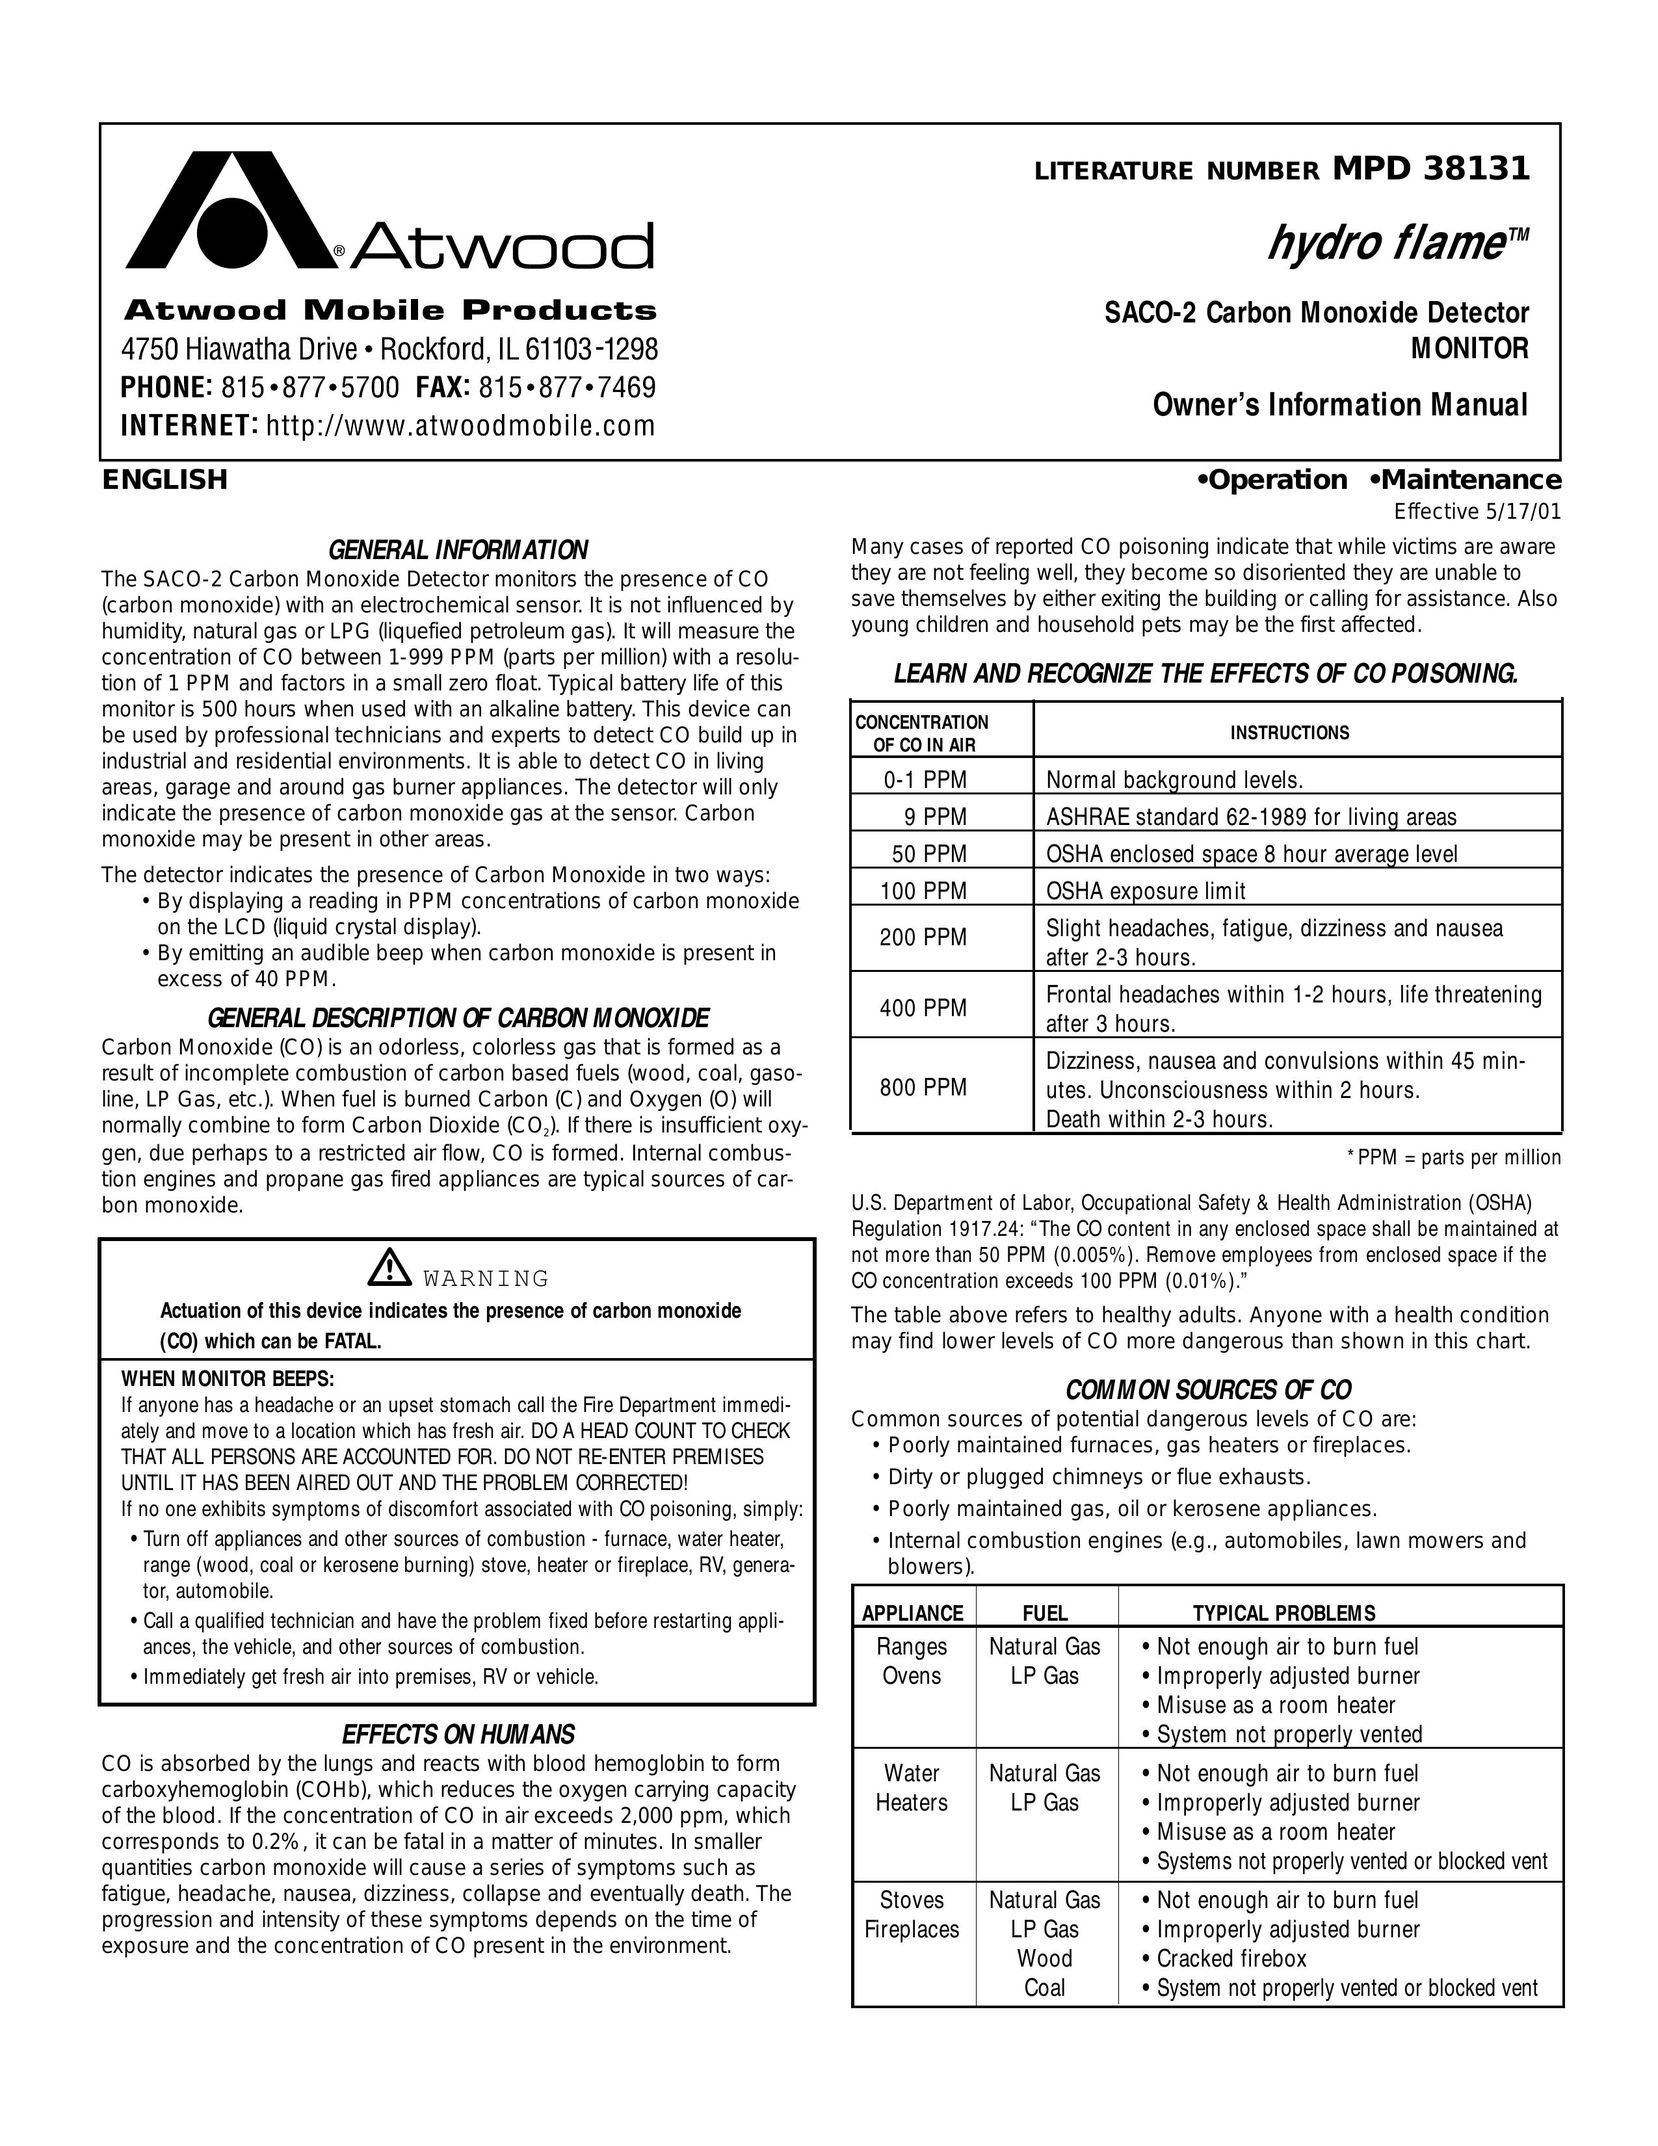 Atwood Mobile Products SACO-2 Carbon Monoxide Alarm User Manual